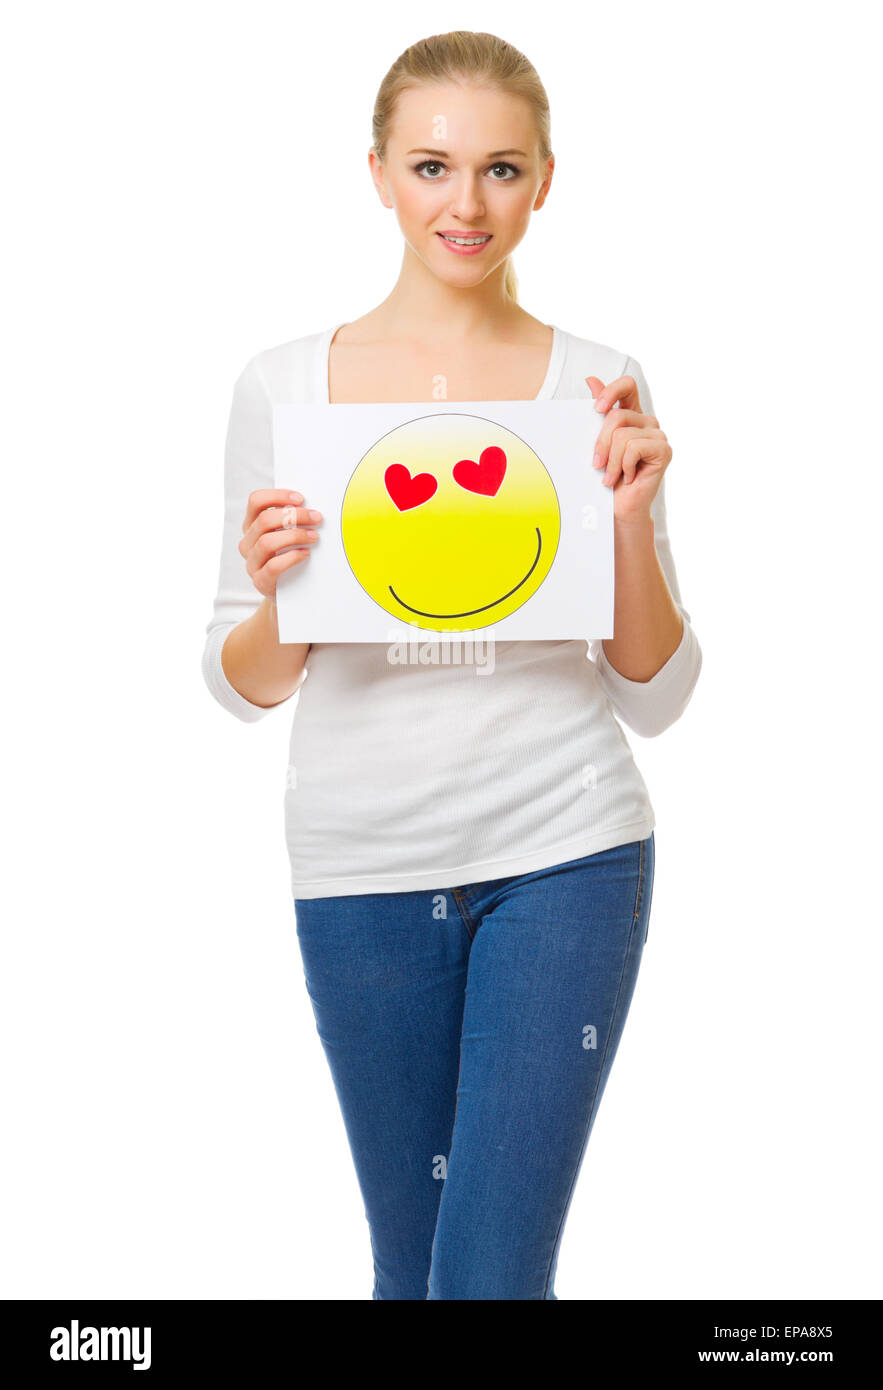 Young girl in jeans with love theme poster isolated Stock Photo